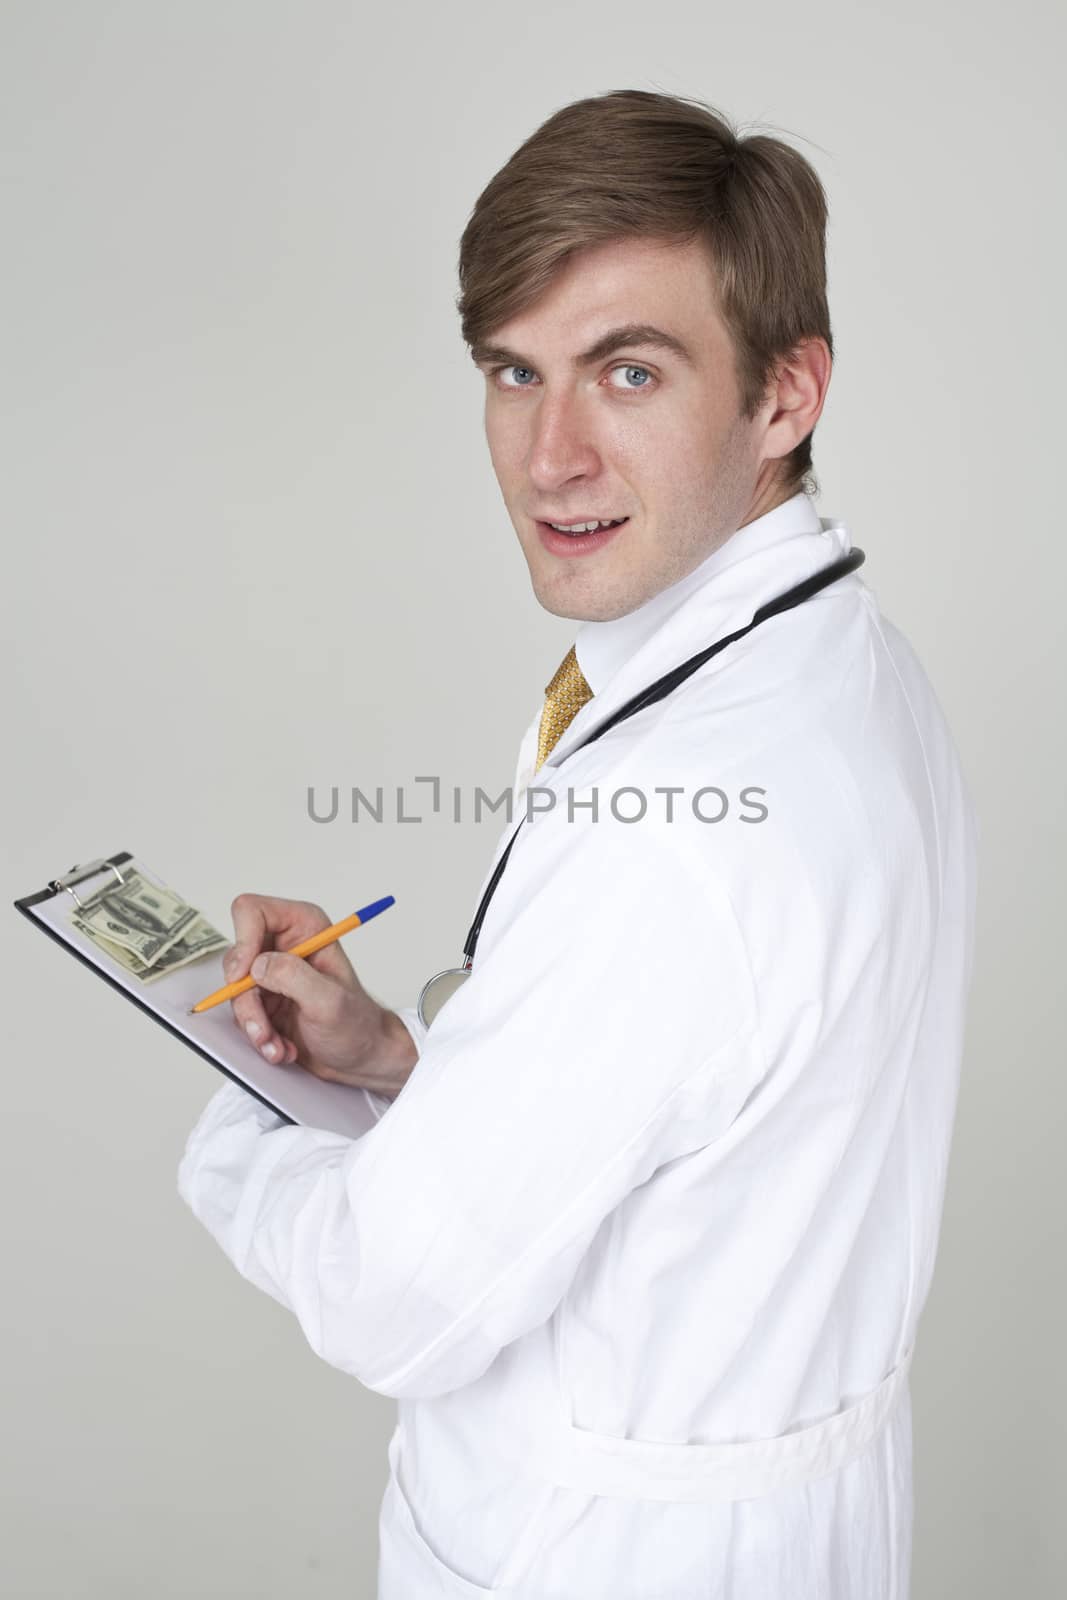 Studio portrait of a confident young doctor by andersonrise